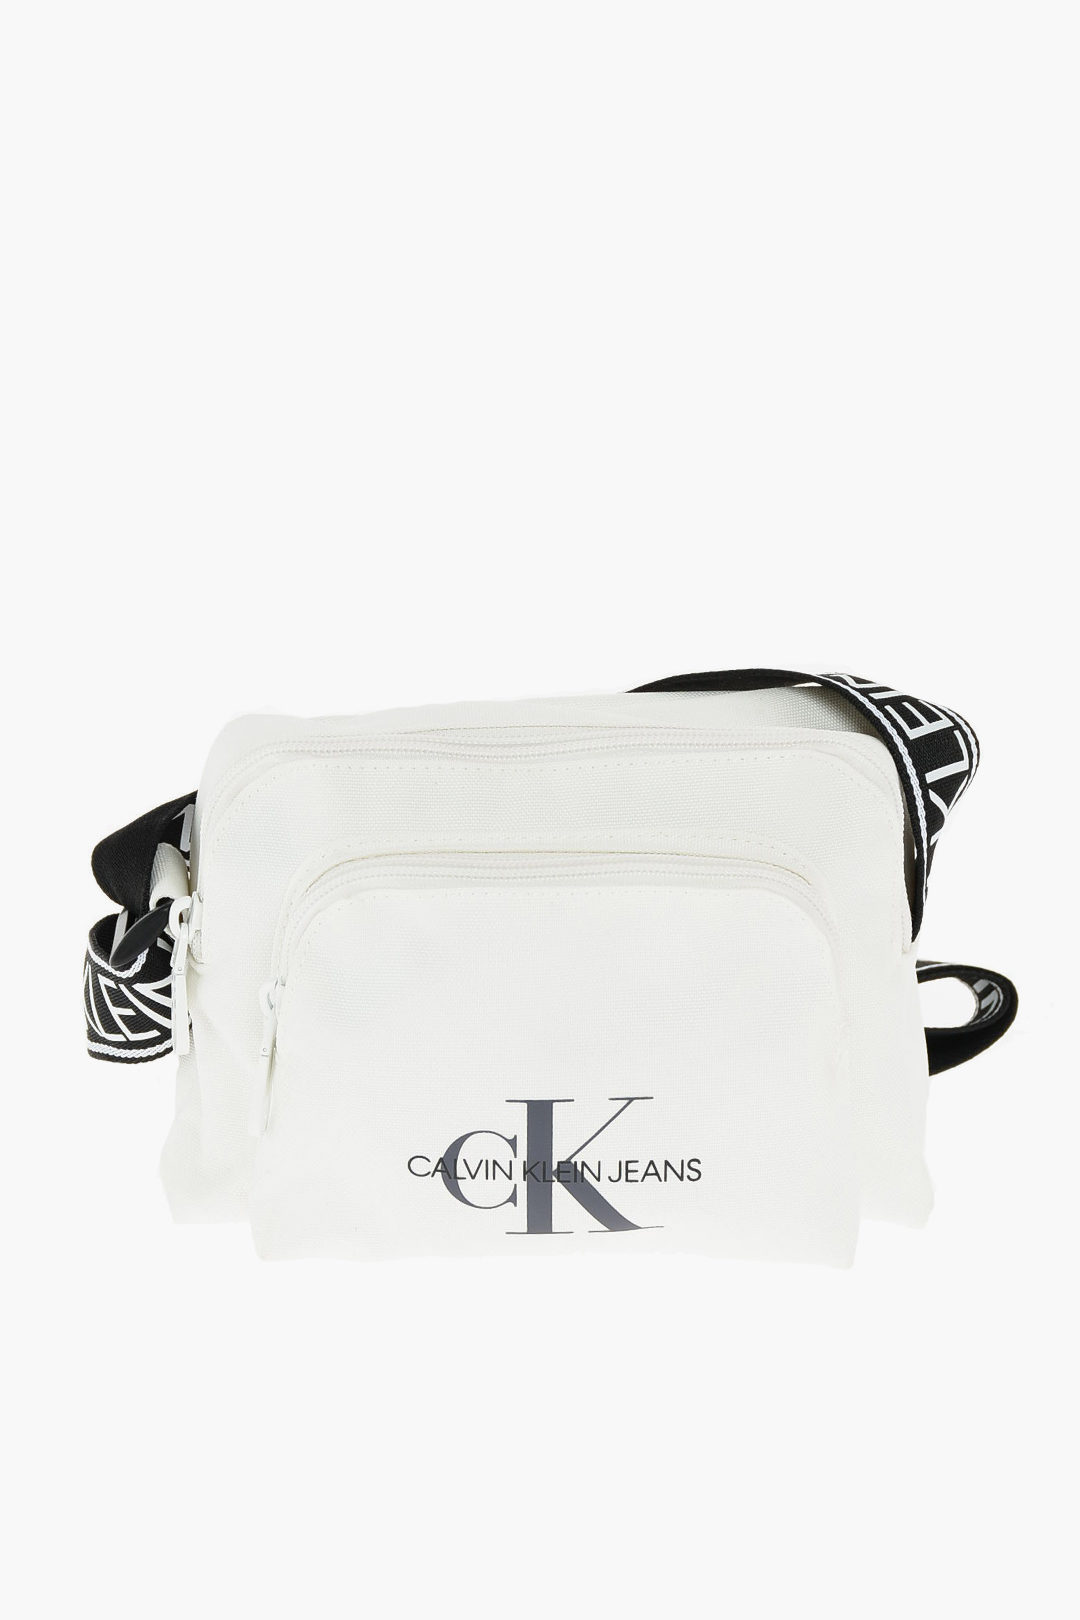 Calvin Klein JEANS fabric camera bag with double zip women - Glamood Outlet